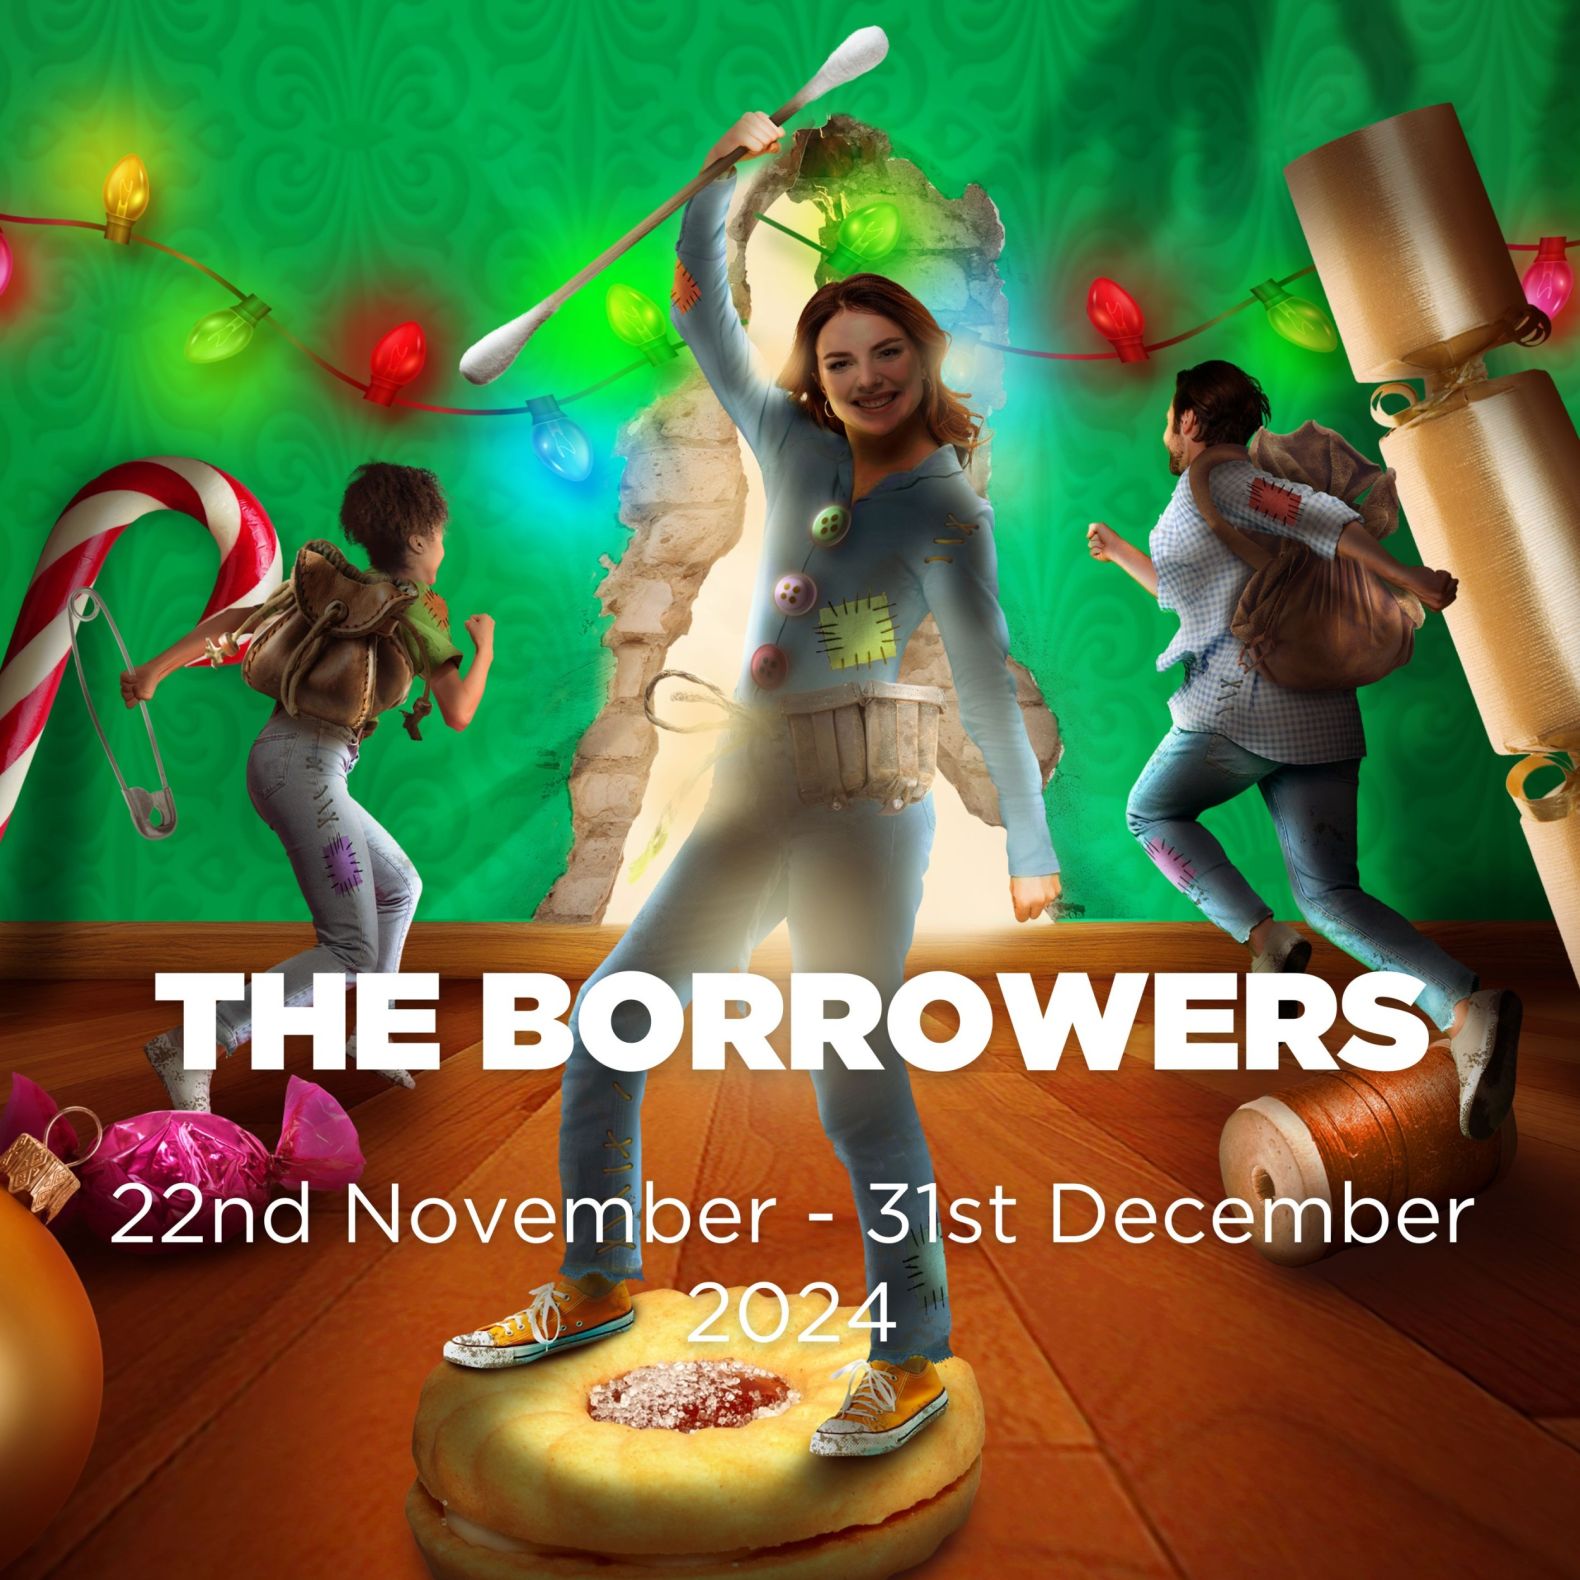 The borrowers poster image